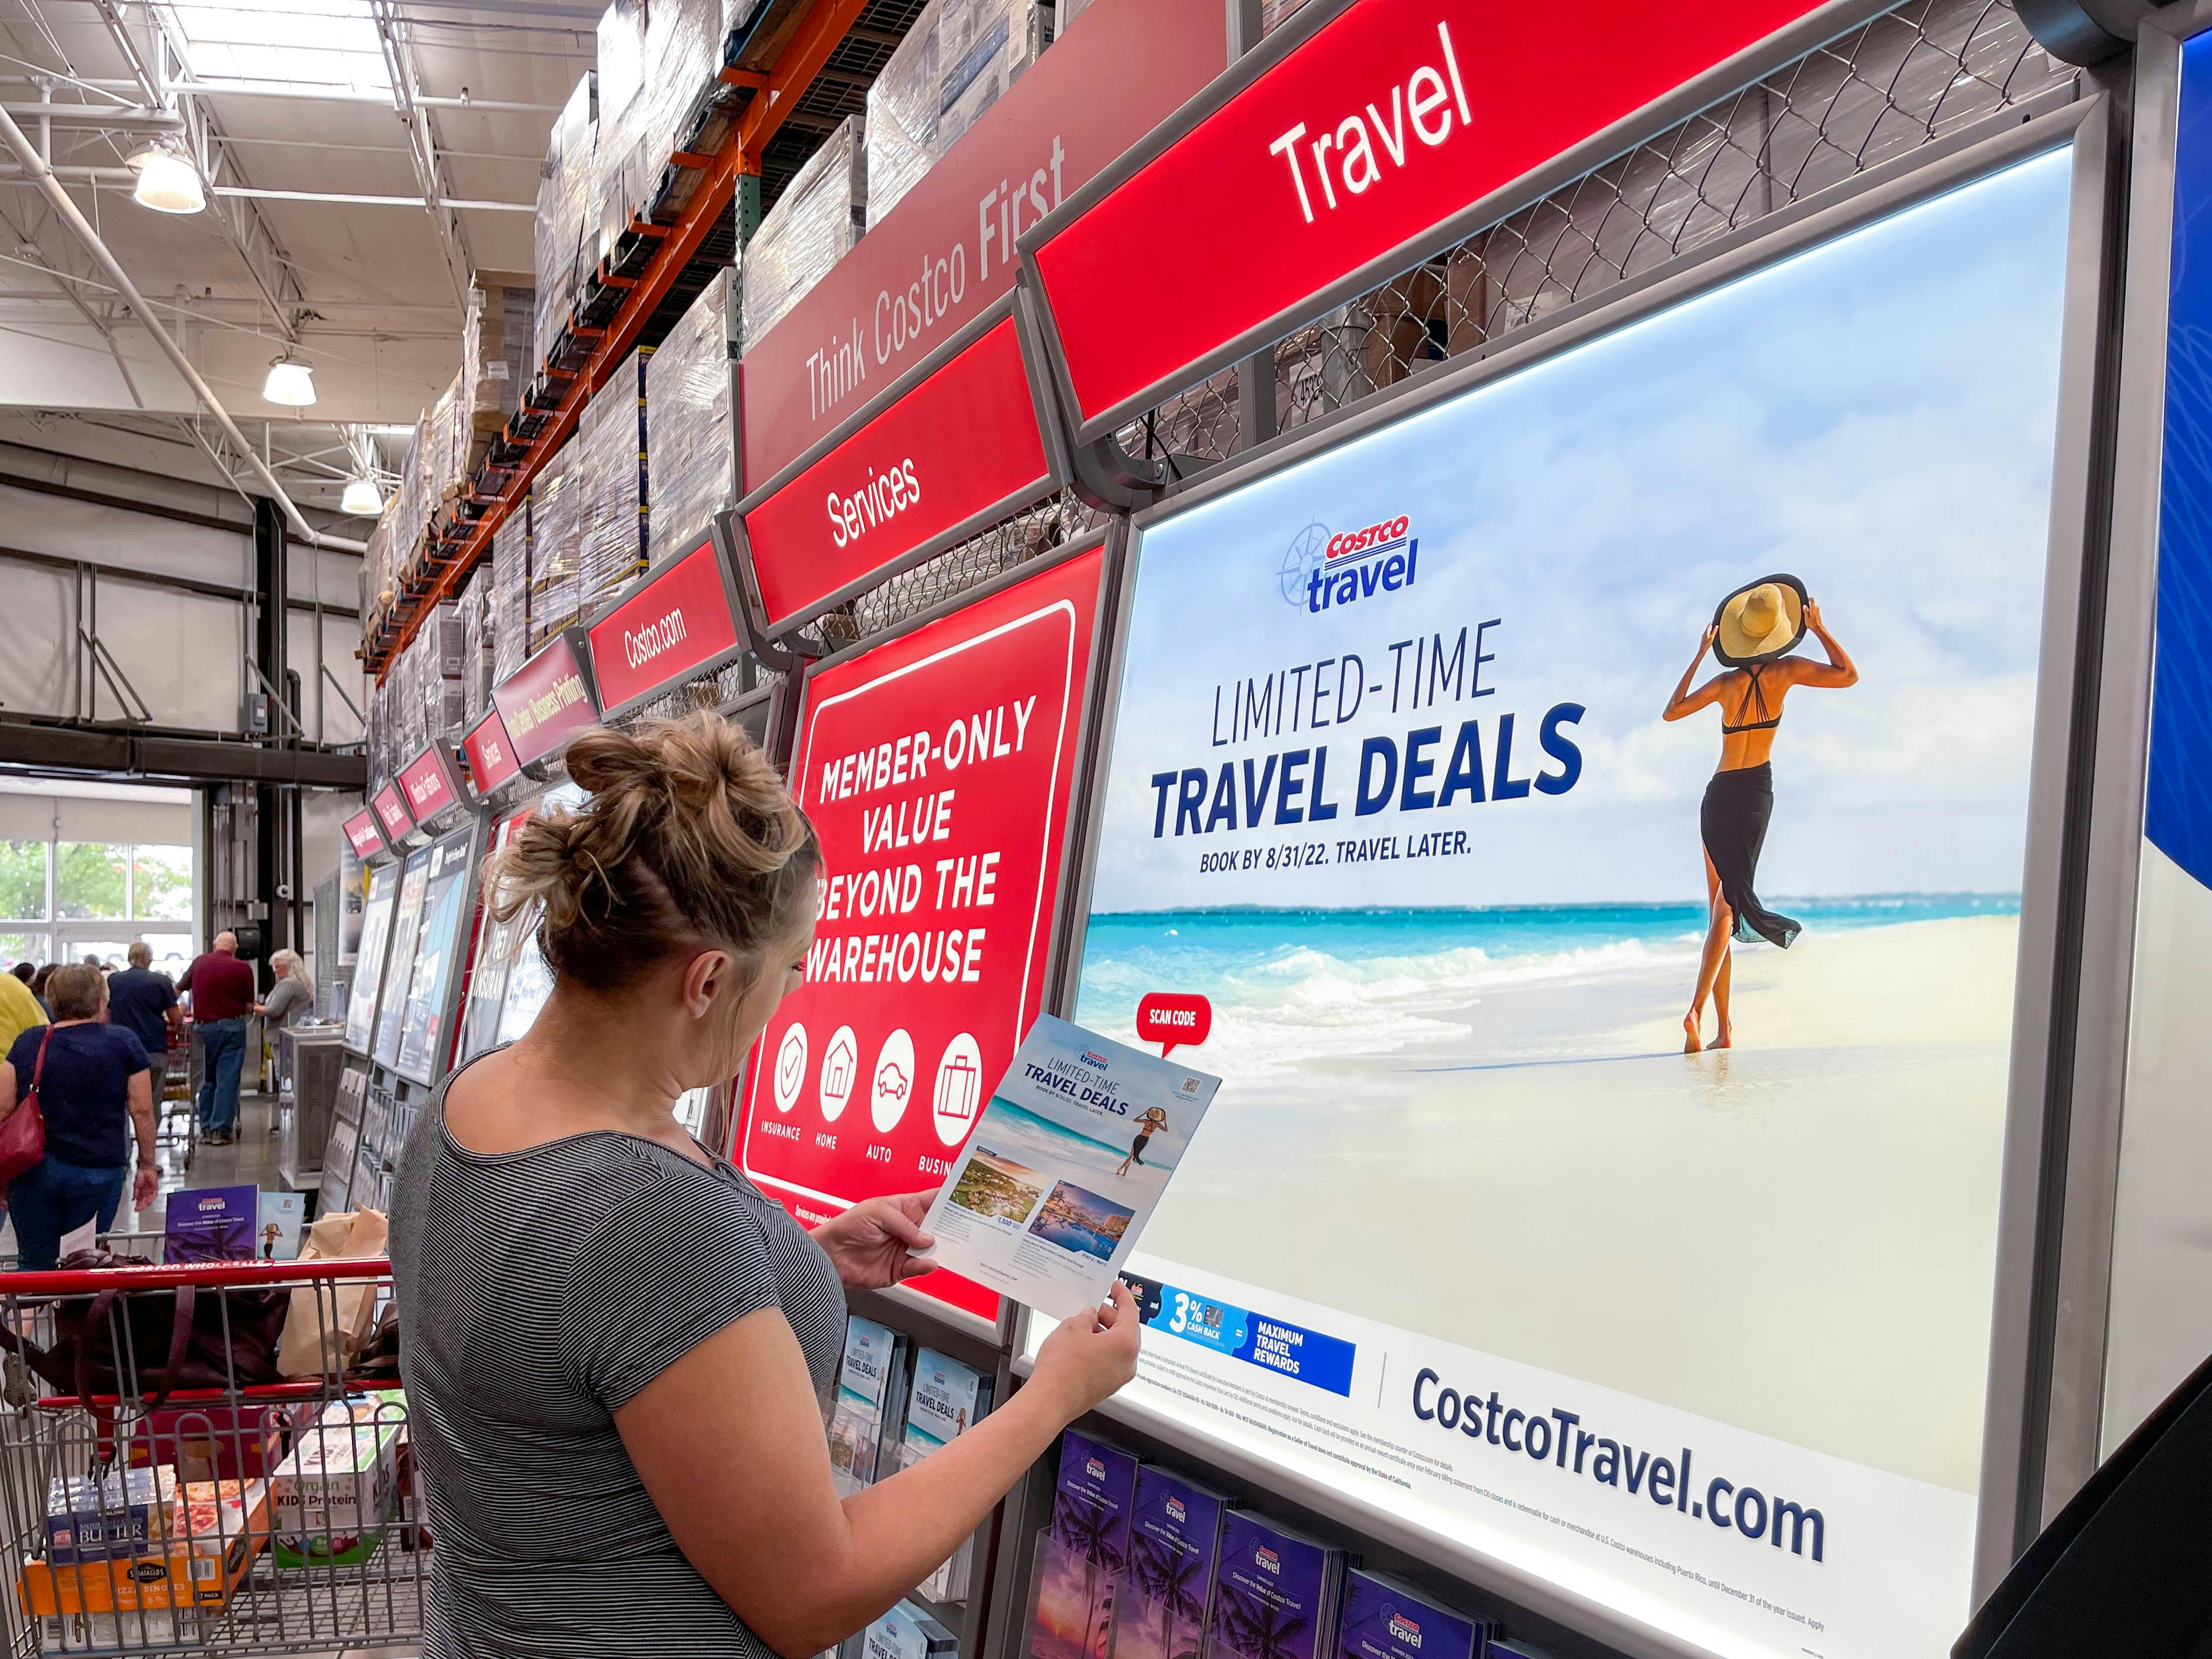 costco travel brochures on being opened in store 